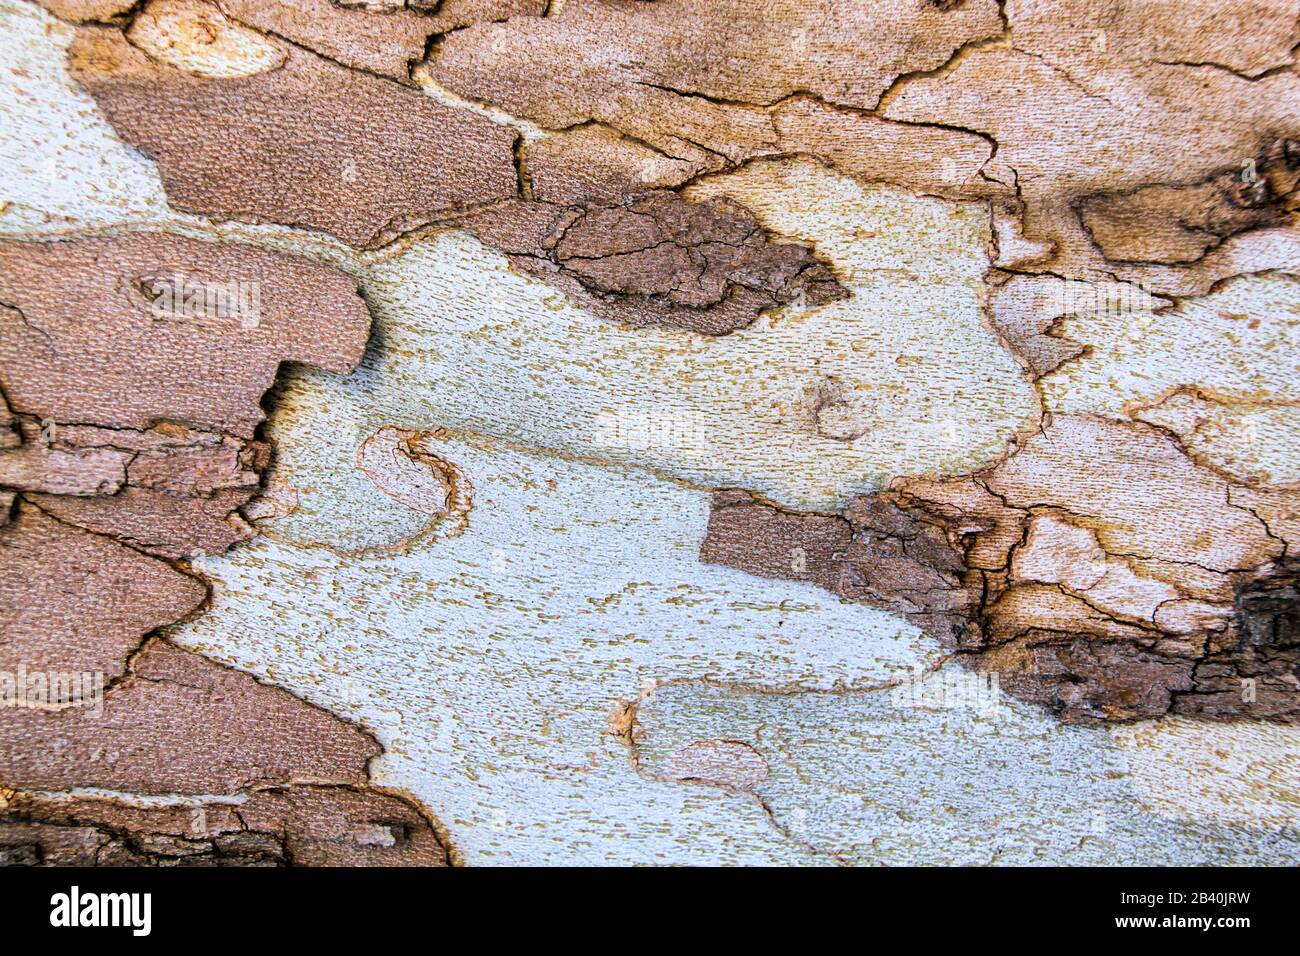 Close up view of the colorful peeling bark of a deciduous tree, creating abstract patterns. Stock Photo